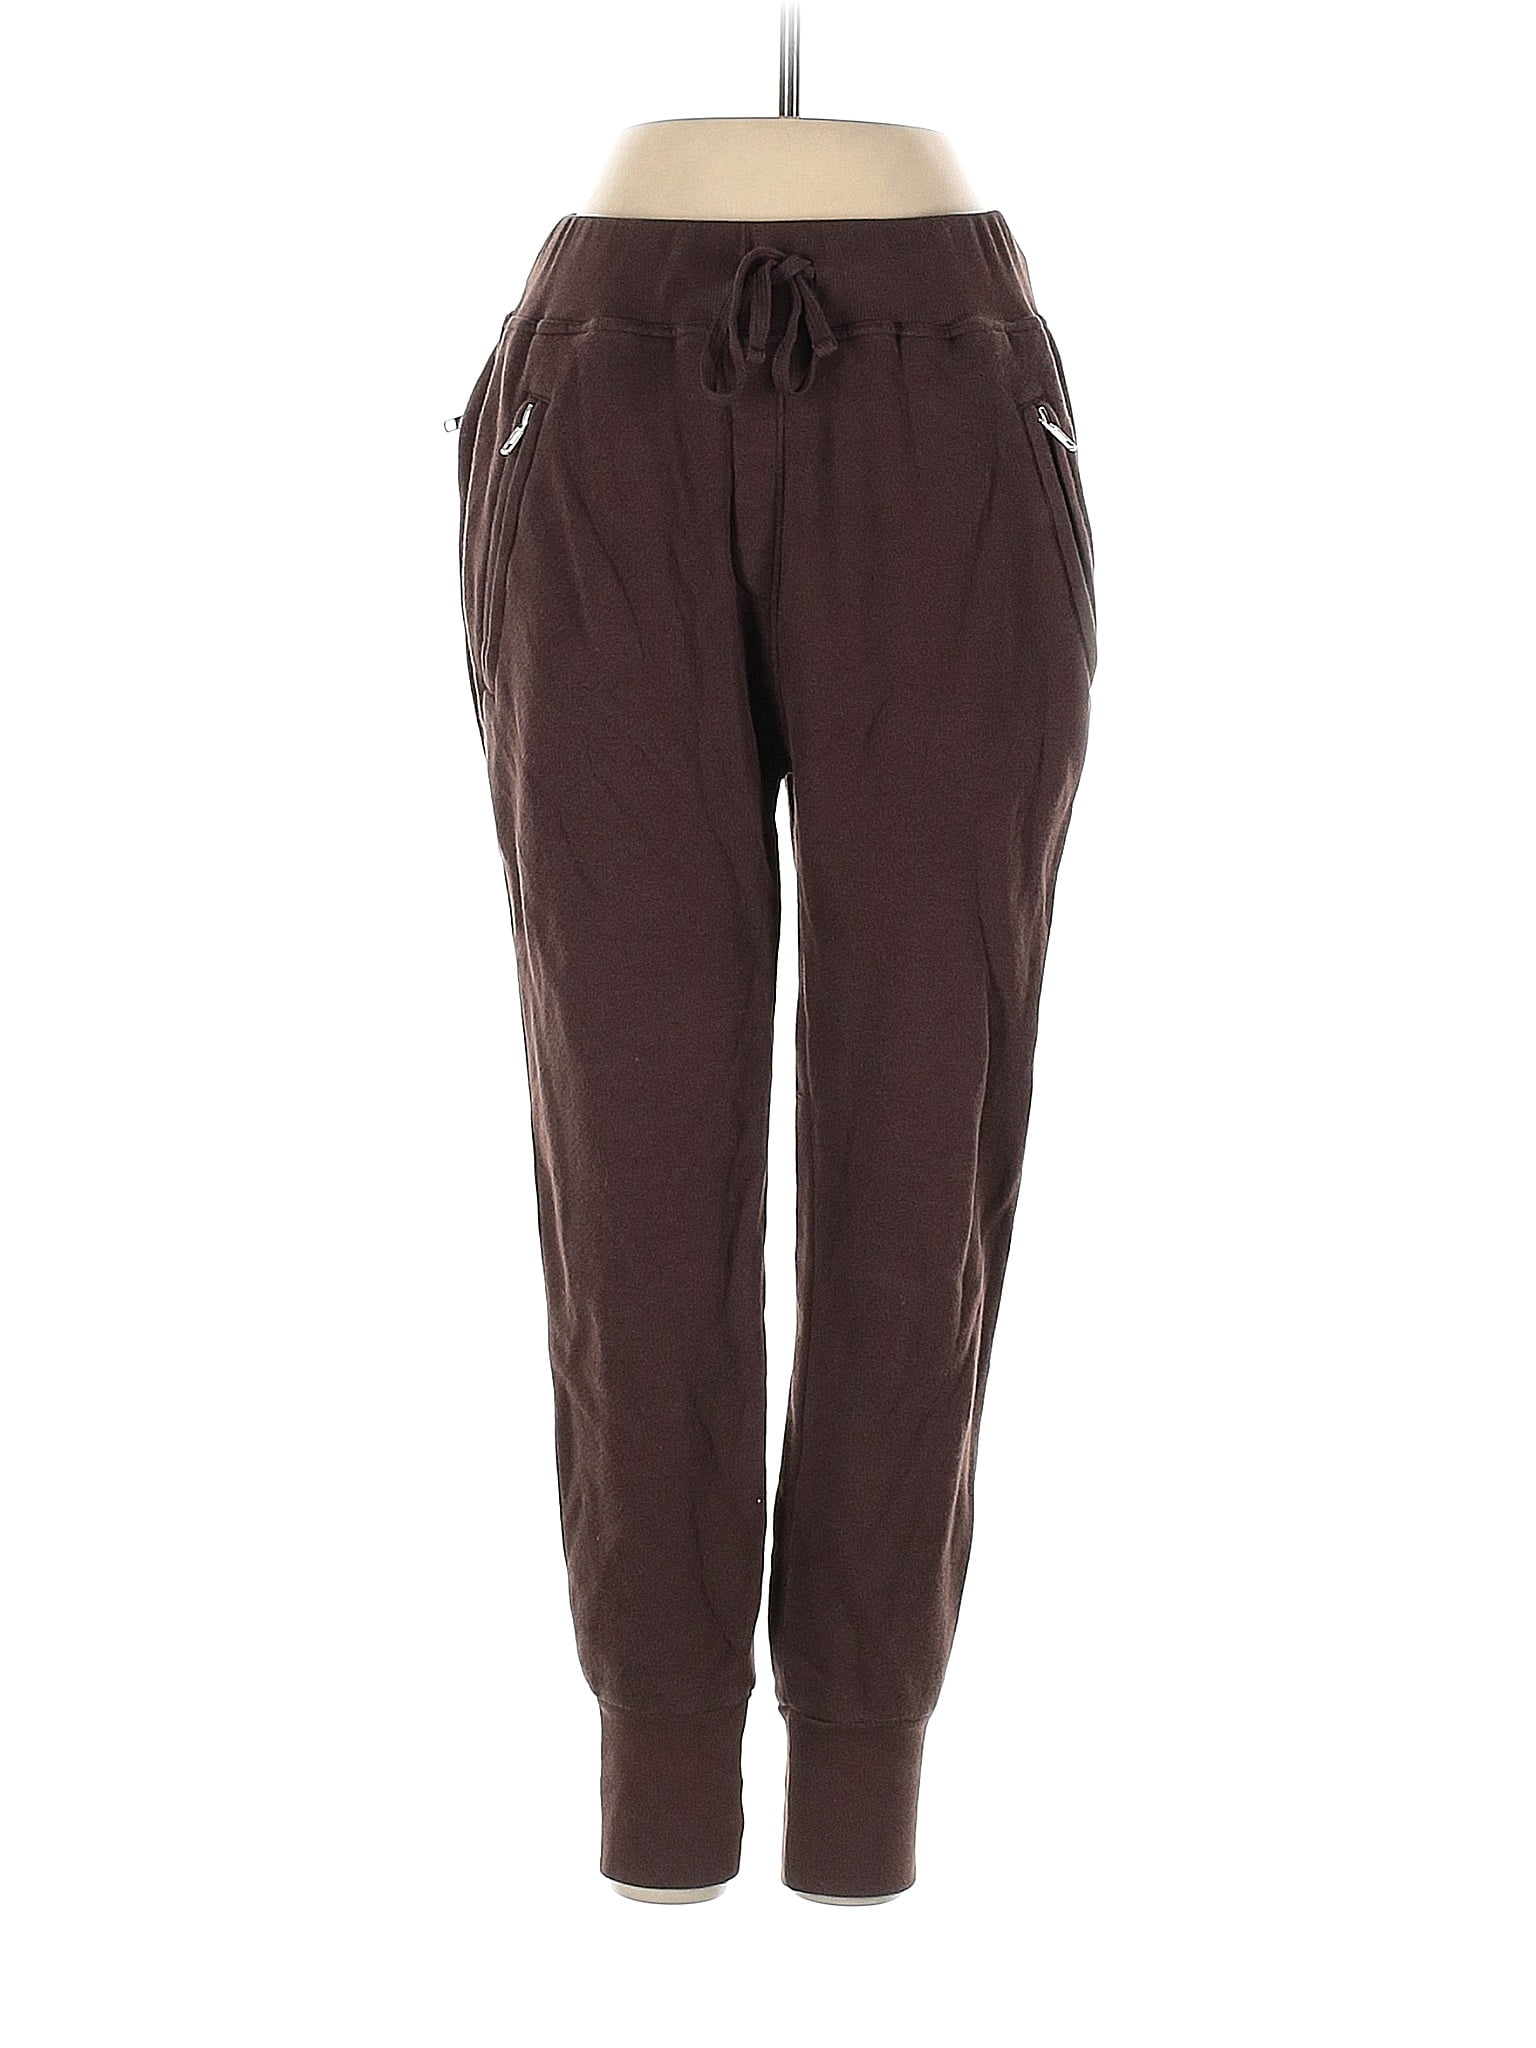 Sincerely Jules for Bandier Solid Brown Casual Pants Size S - 73% off